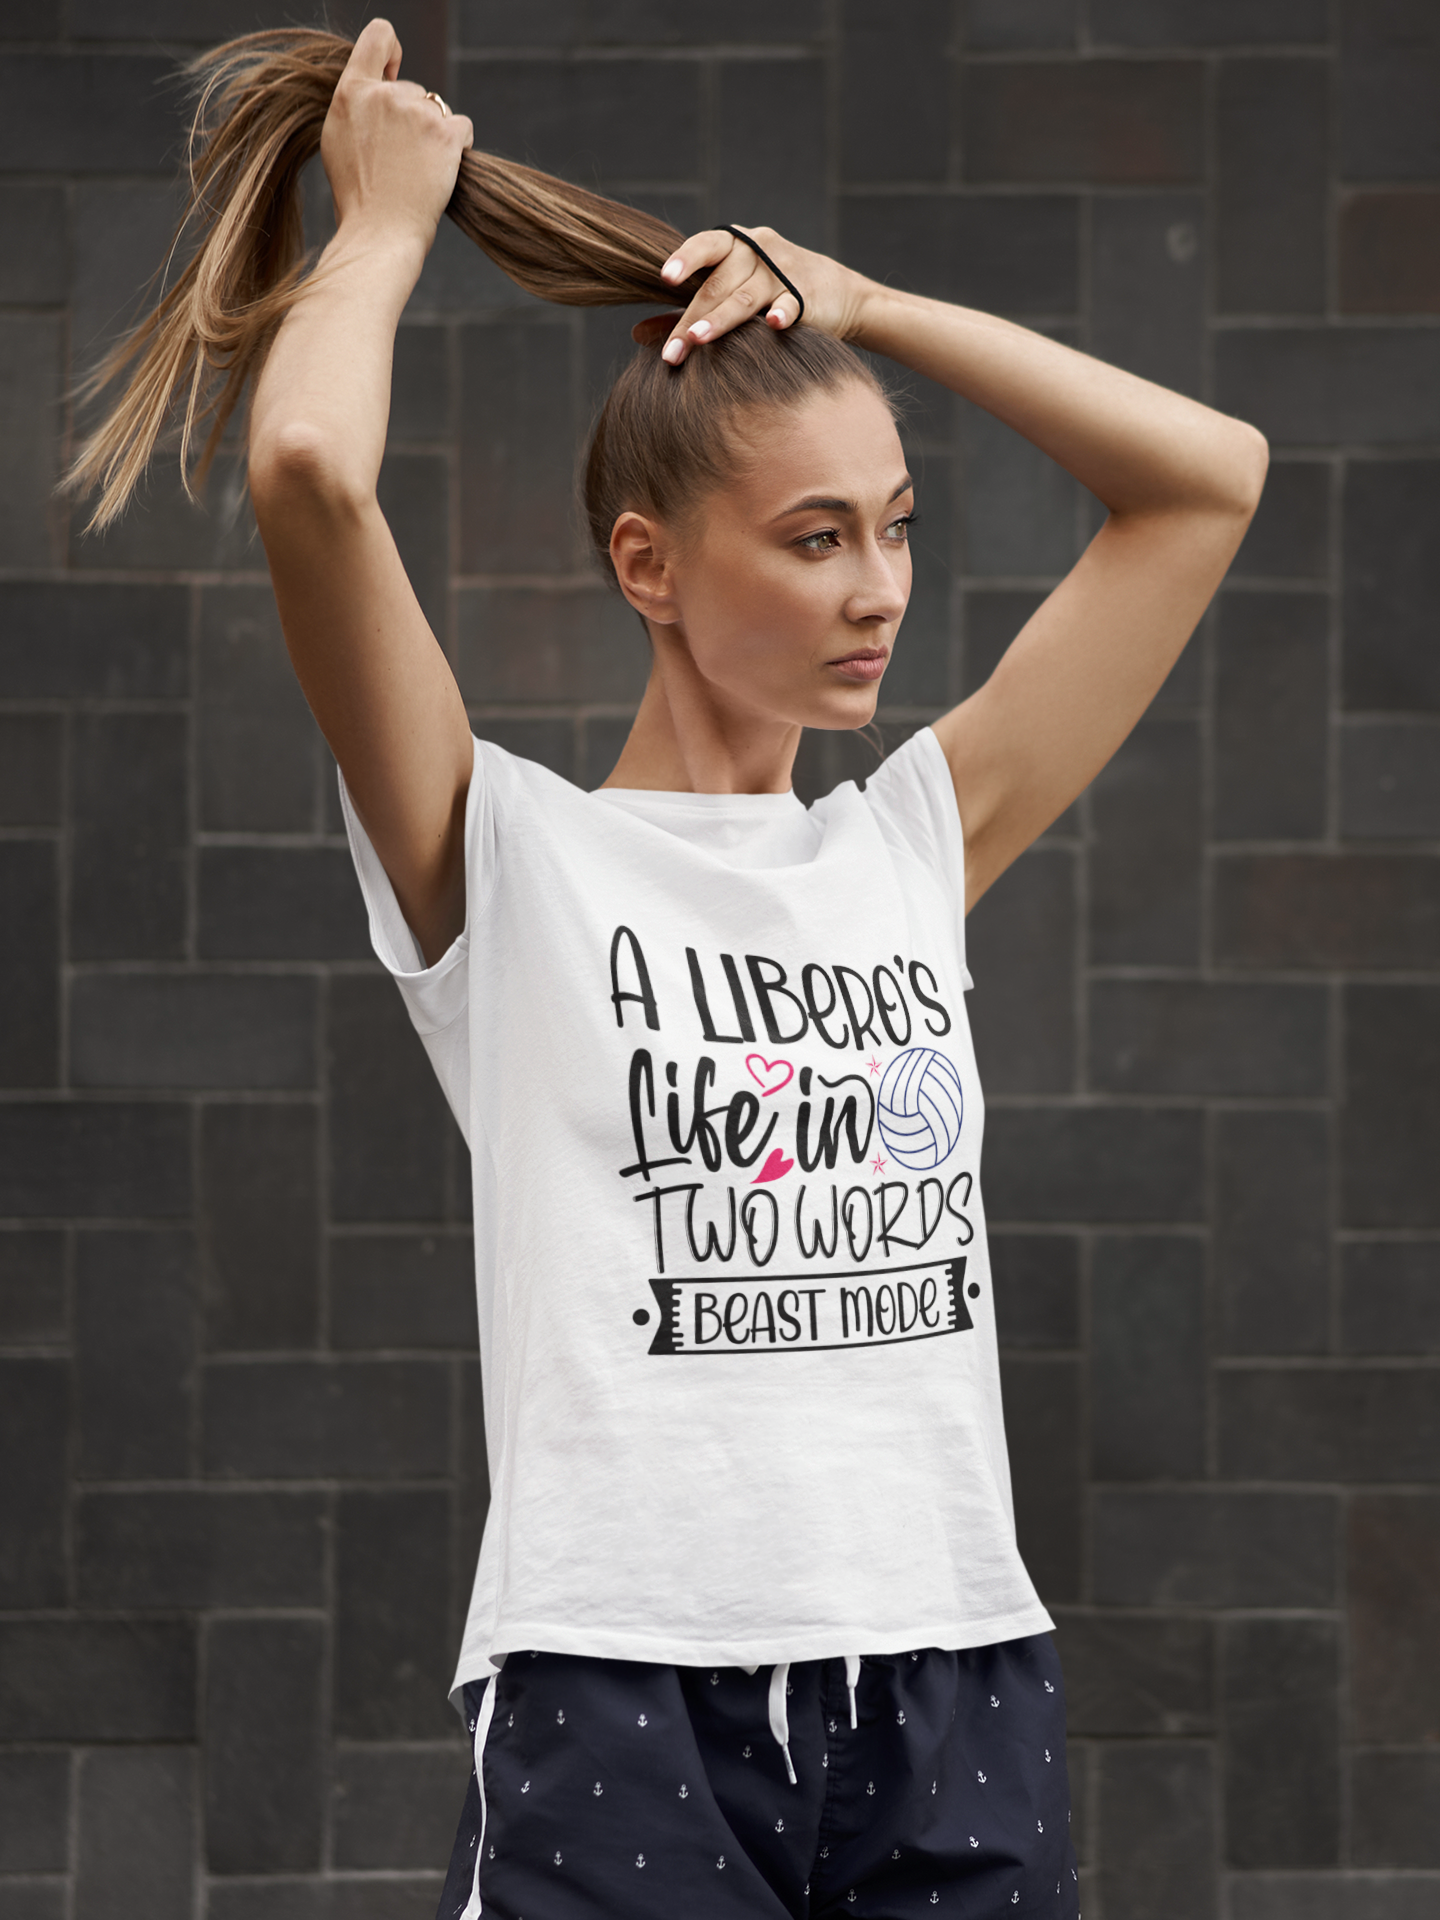 These girl volleyball shirt ideas by Volleybragswag have fun graphic designs meant to inspire and hype up backrow players like liberos and defensive specialists